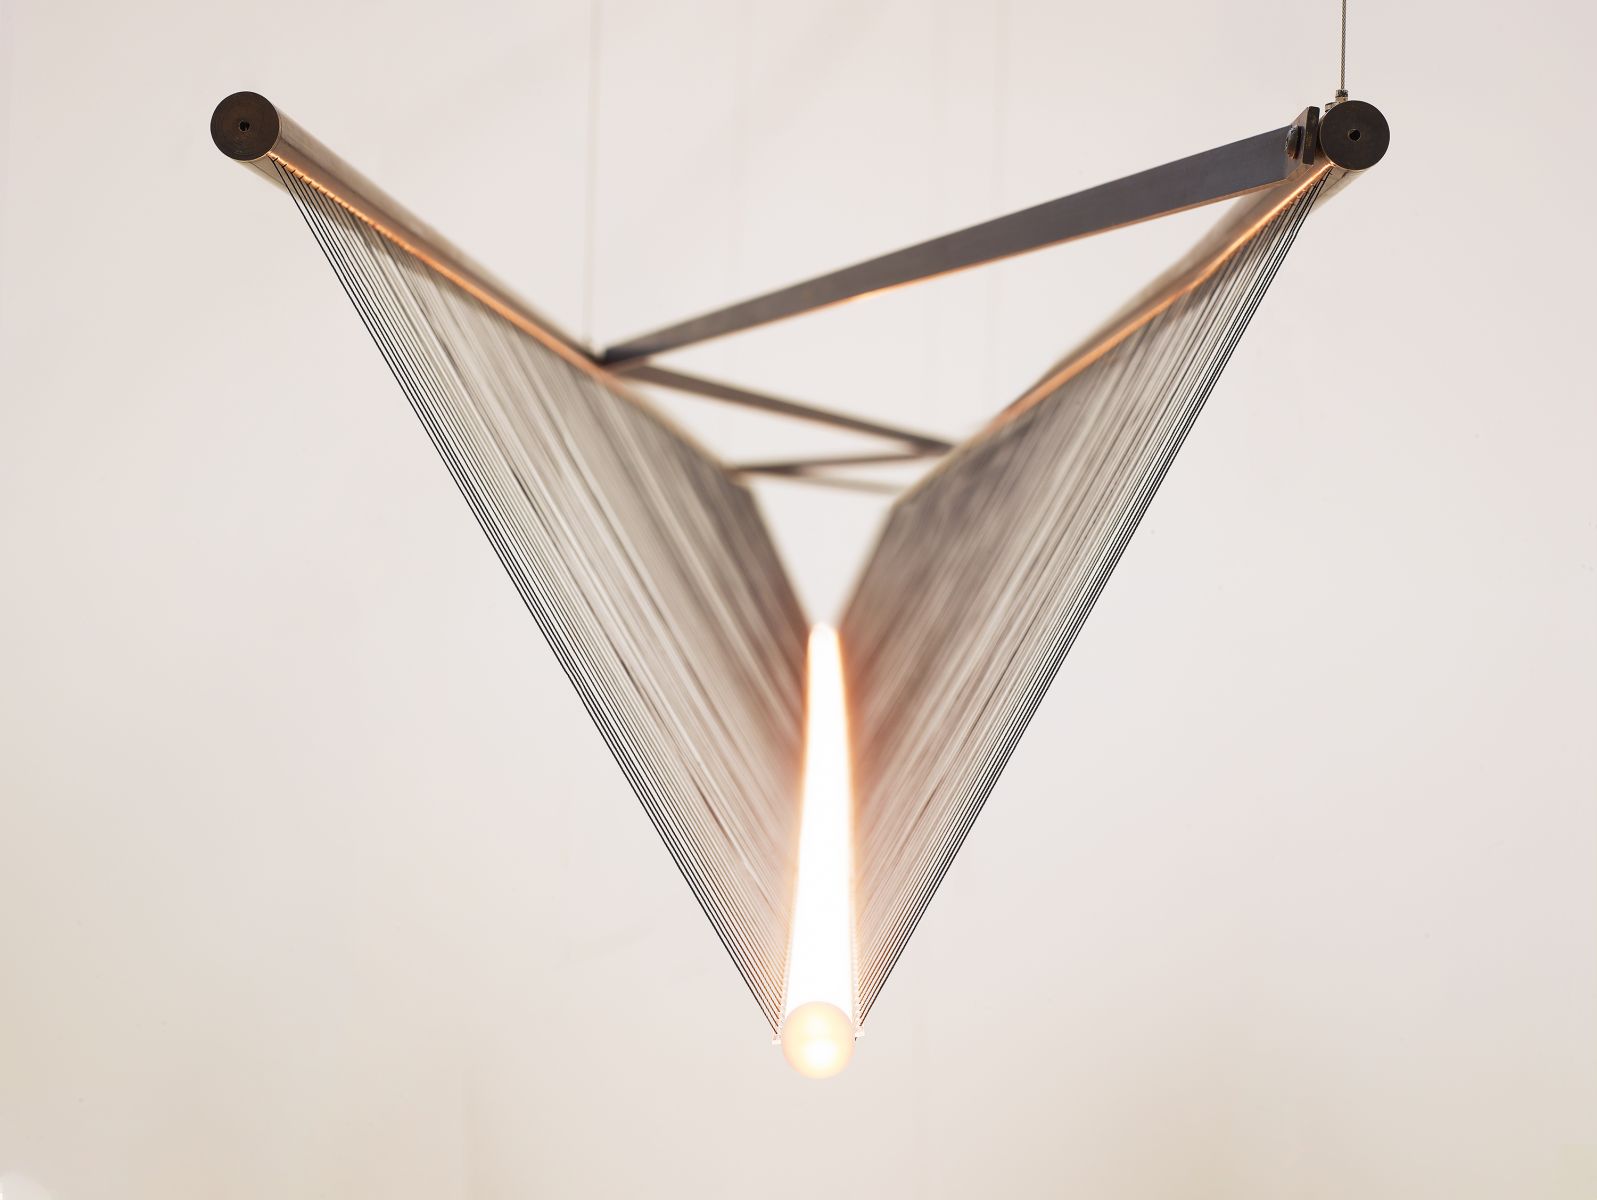 Spun Beam by Umut Yamac. Patinated brass, thread, stainless steel 2